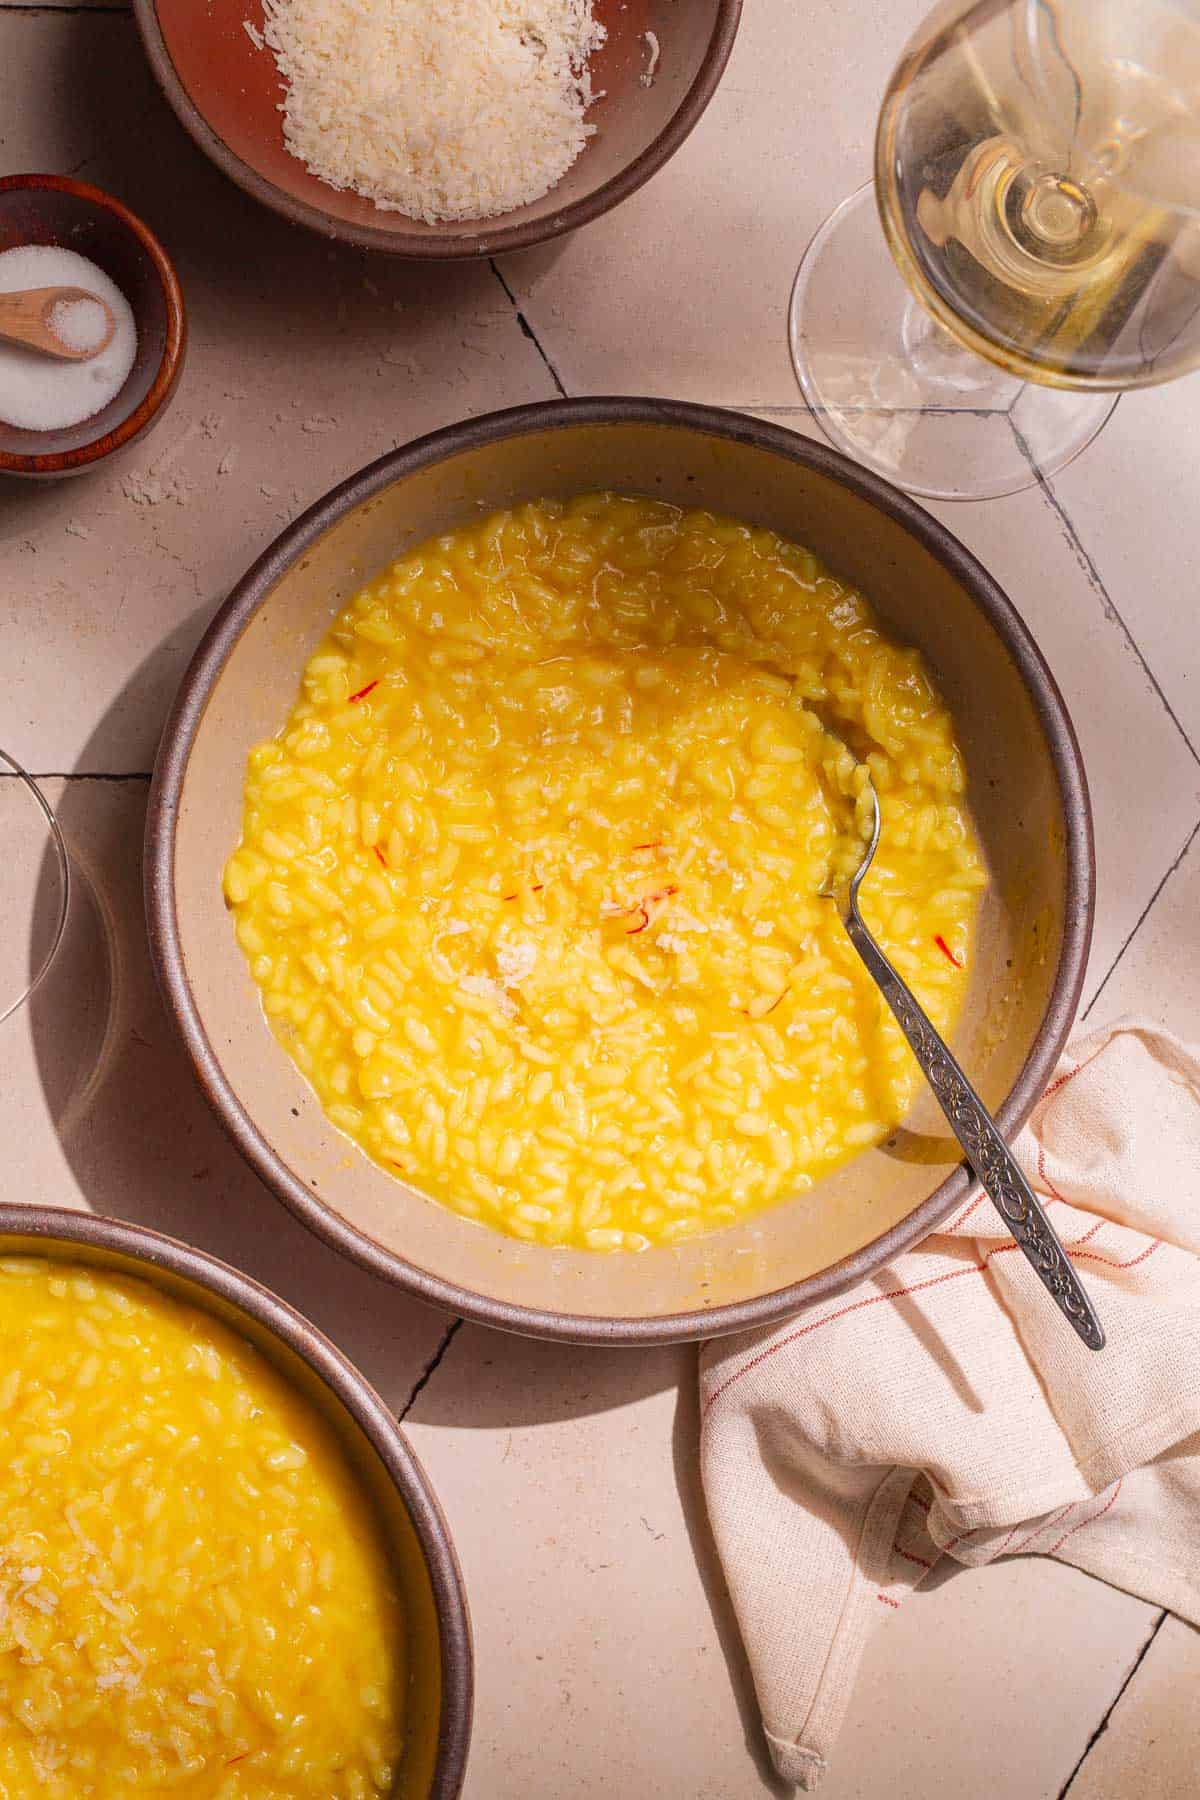 two bowls of risotto alla milanese saffron risotto next to a small bowl of grated parmesan cheese, a small bowl of salt, and a glass of wine.